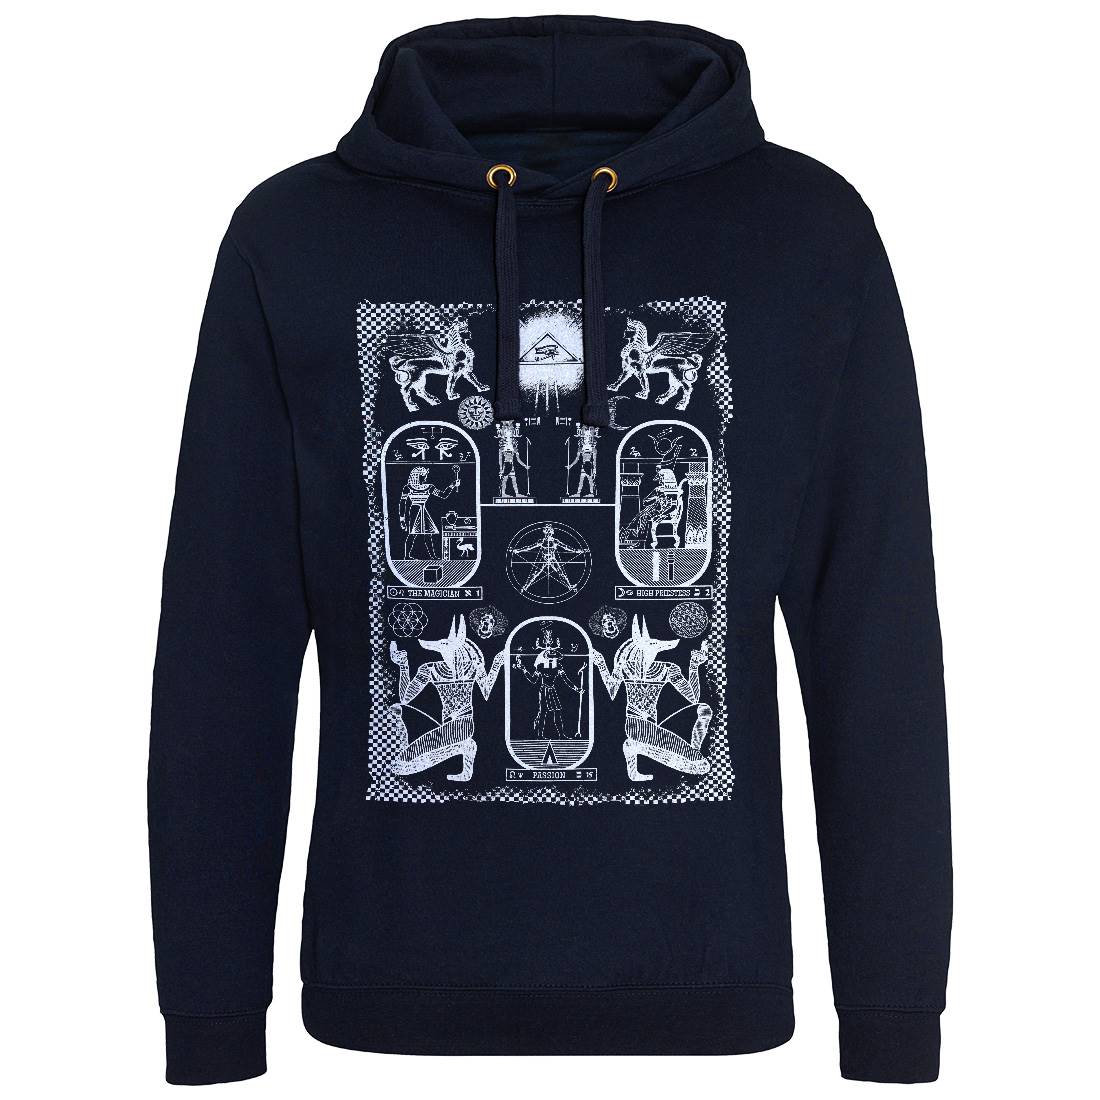 Light Of Khemet Mens Hoodie Without Pocket Religion A863